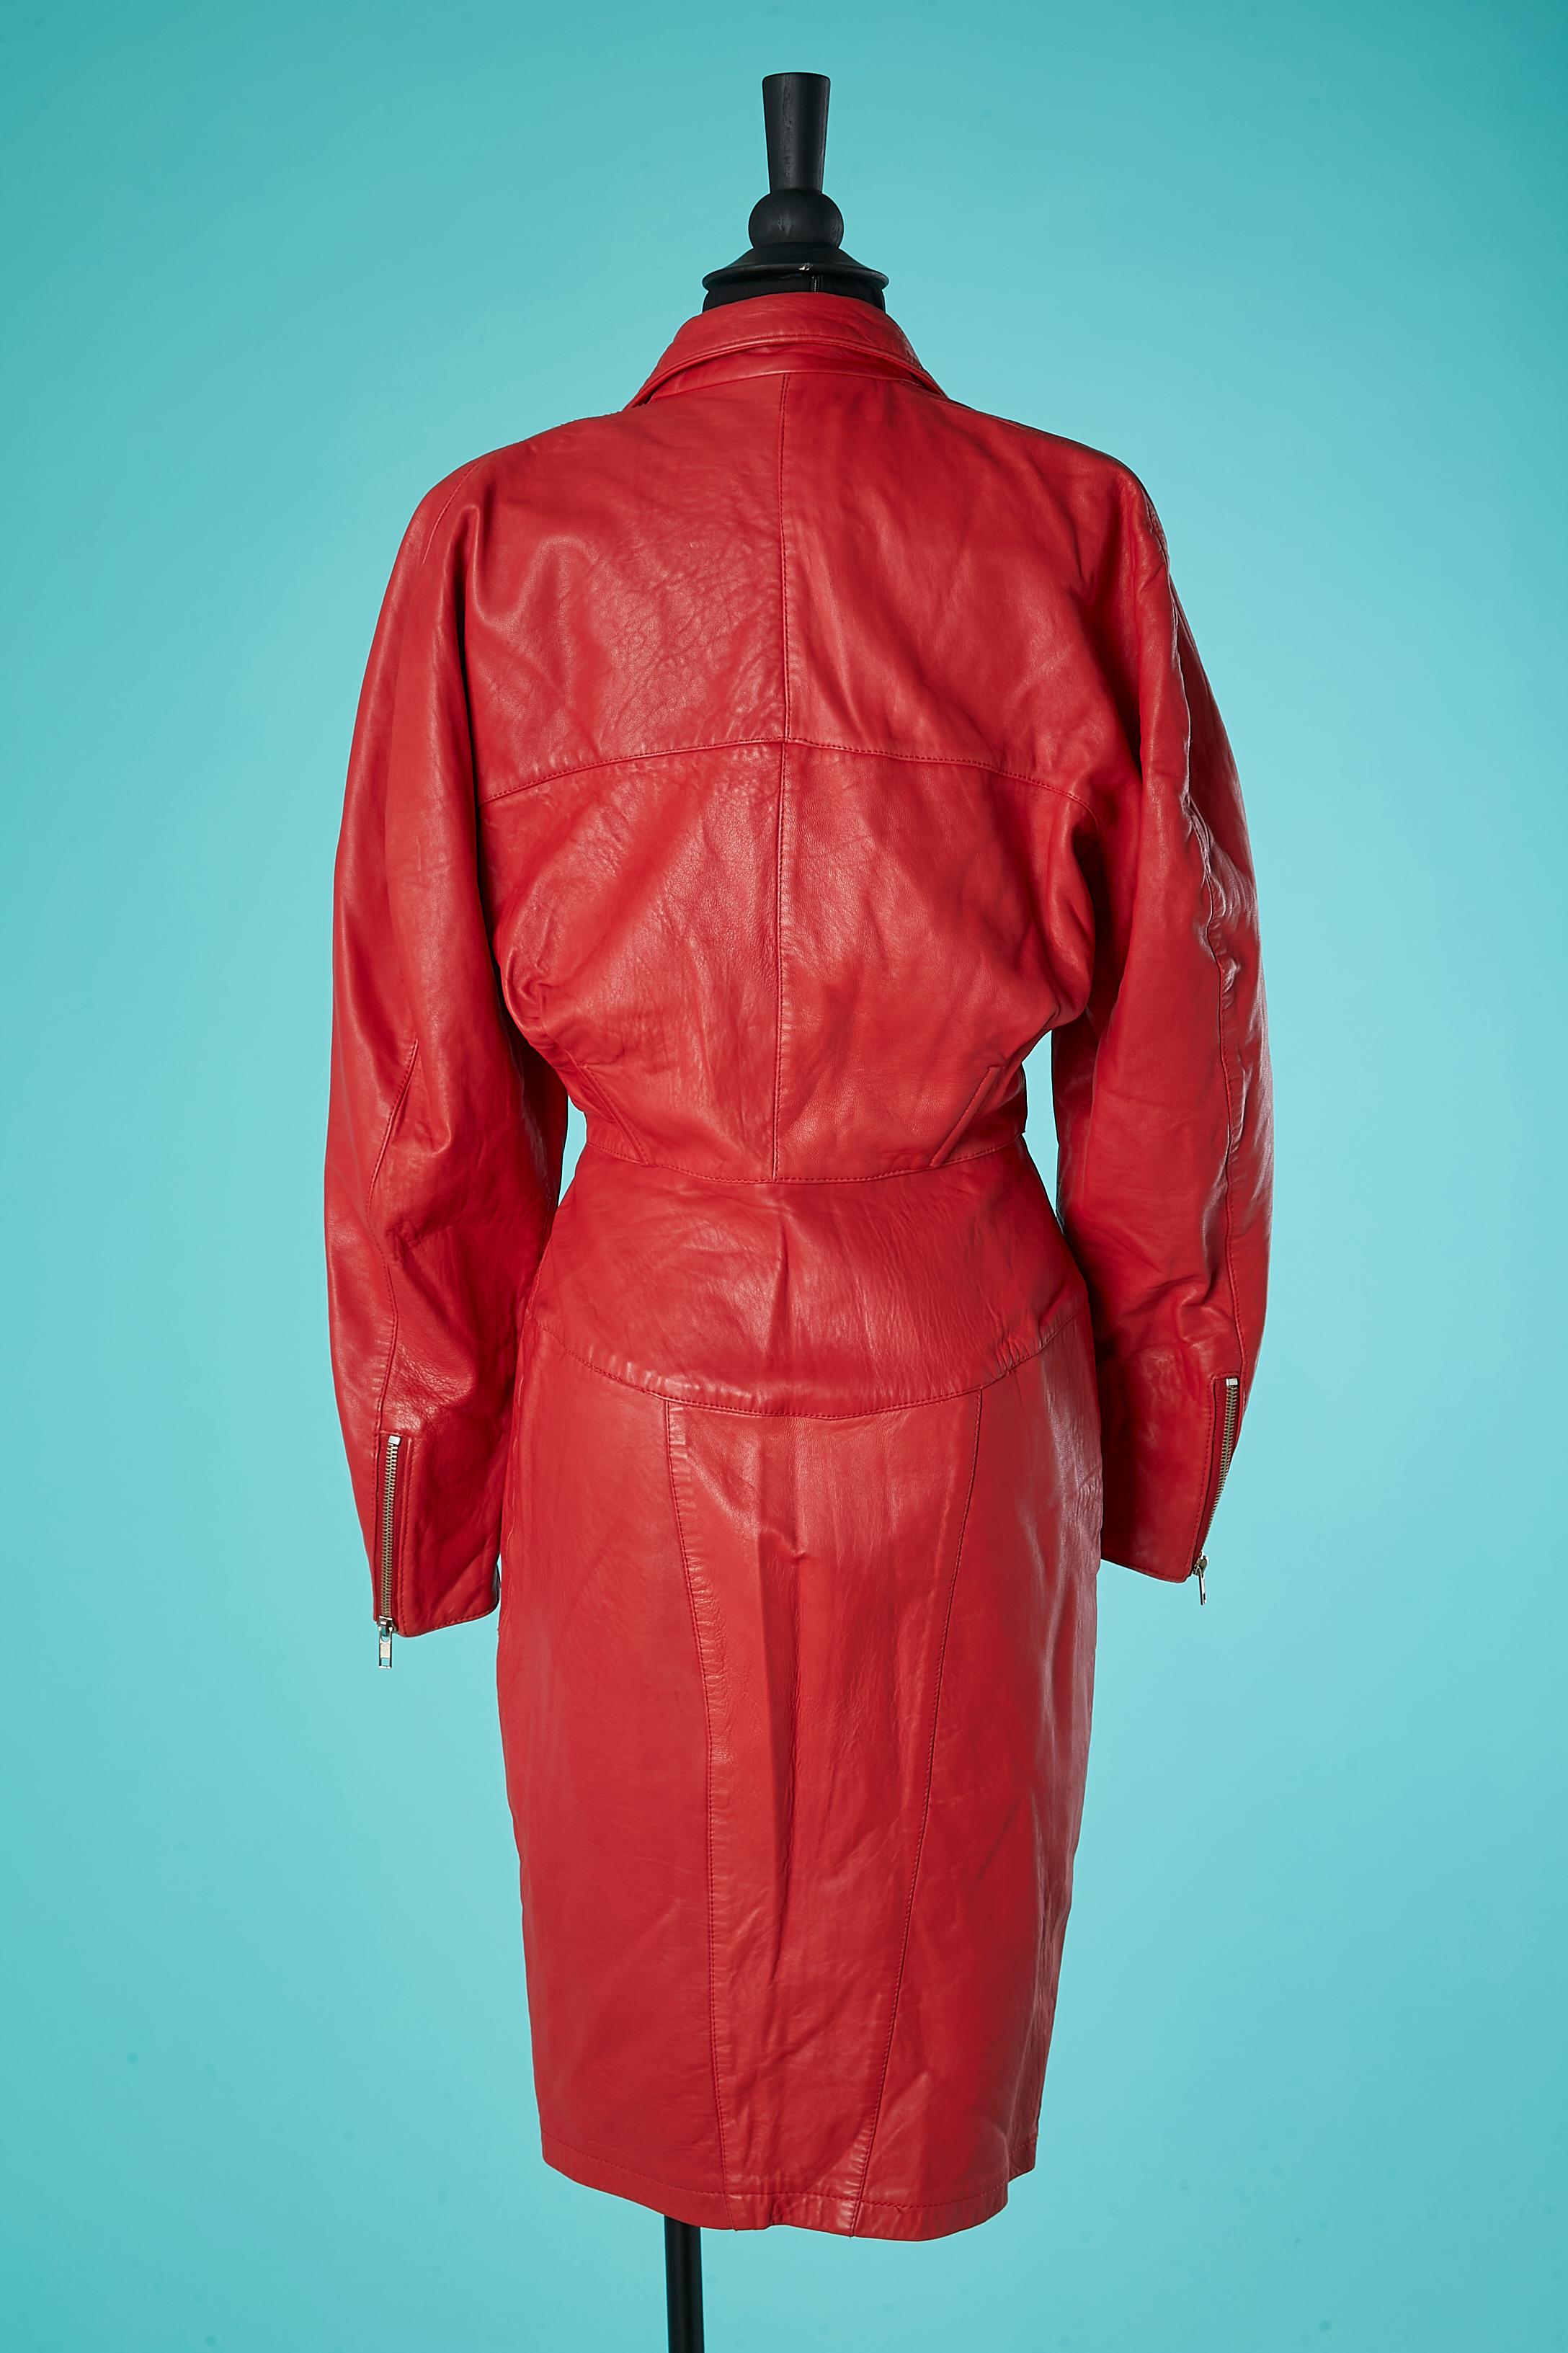 Red leather dress with zip in the middle front M.Hoban for North Beach Leather  For Sale 2